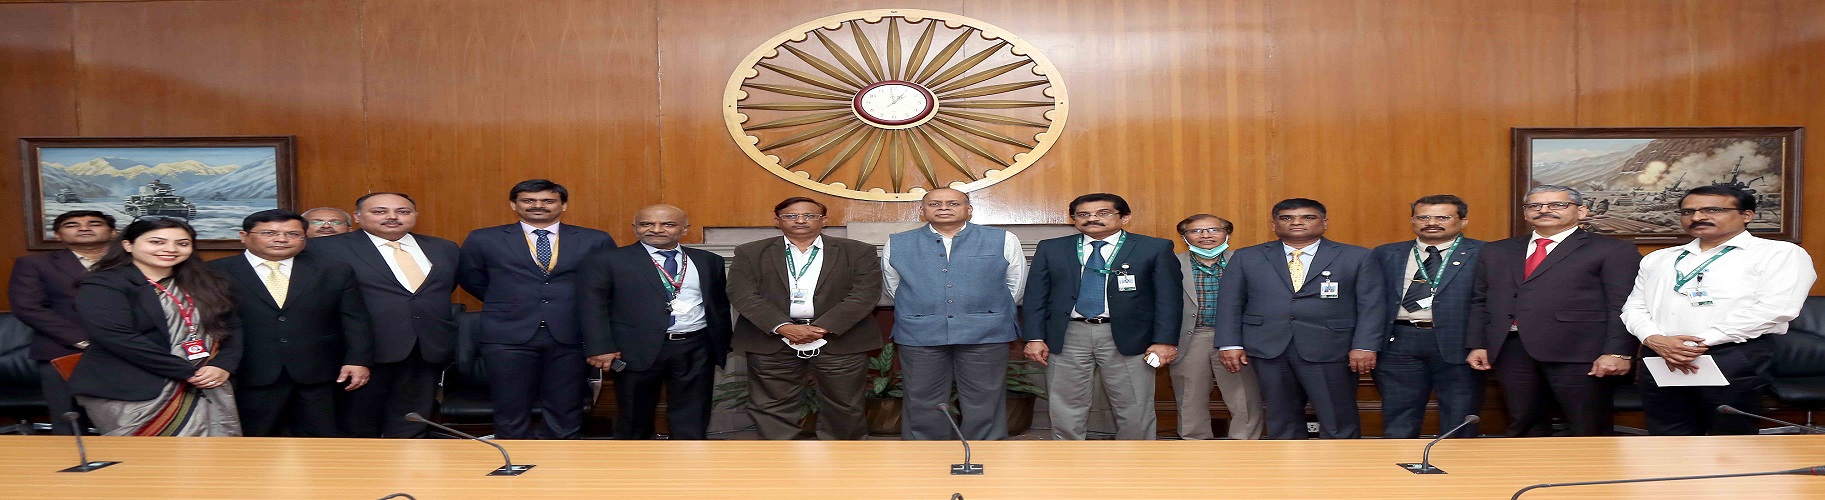 MoU signed between Ministry of Defence and CSC e-Governance Services India Limited to onboard pension services under the System for Pension Administration Raksha SPARSH in the presence of Defence Secretary Dr Ajay Kumar in New Delhi on February 24 